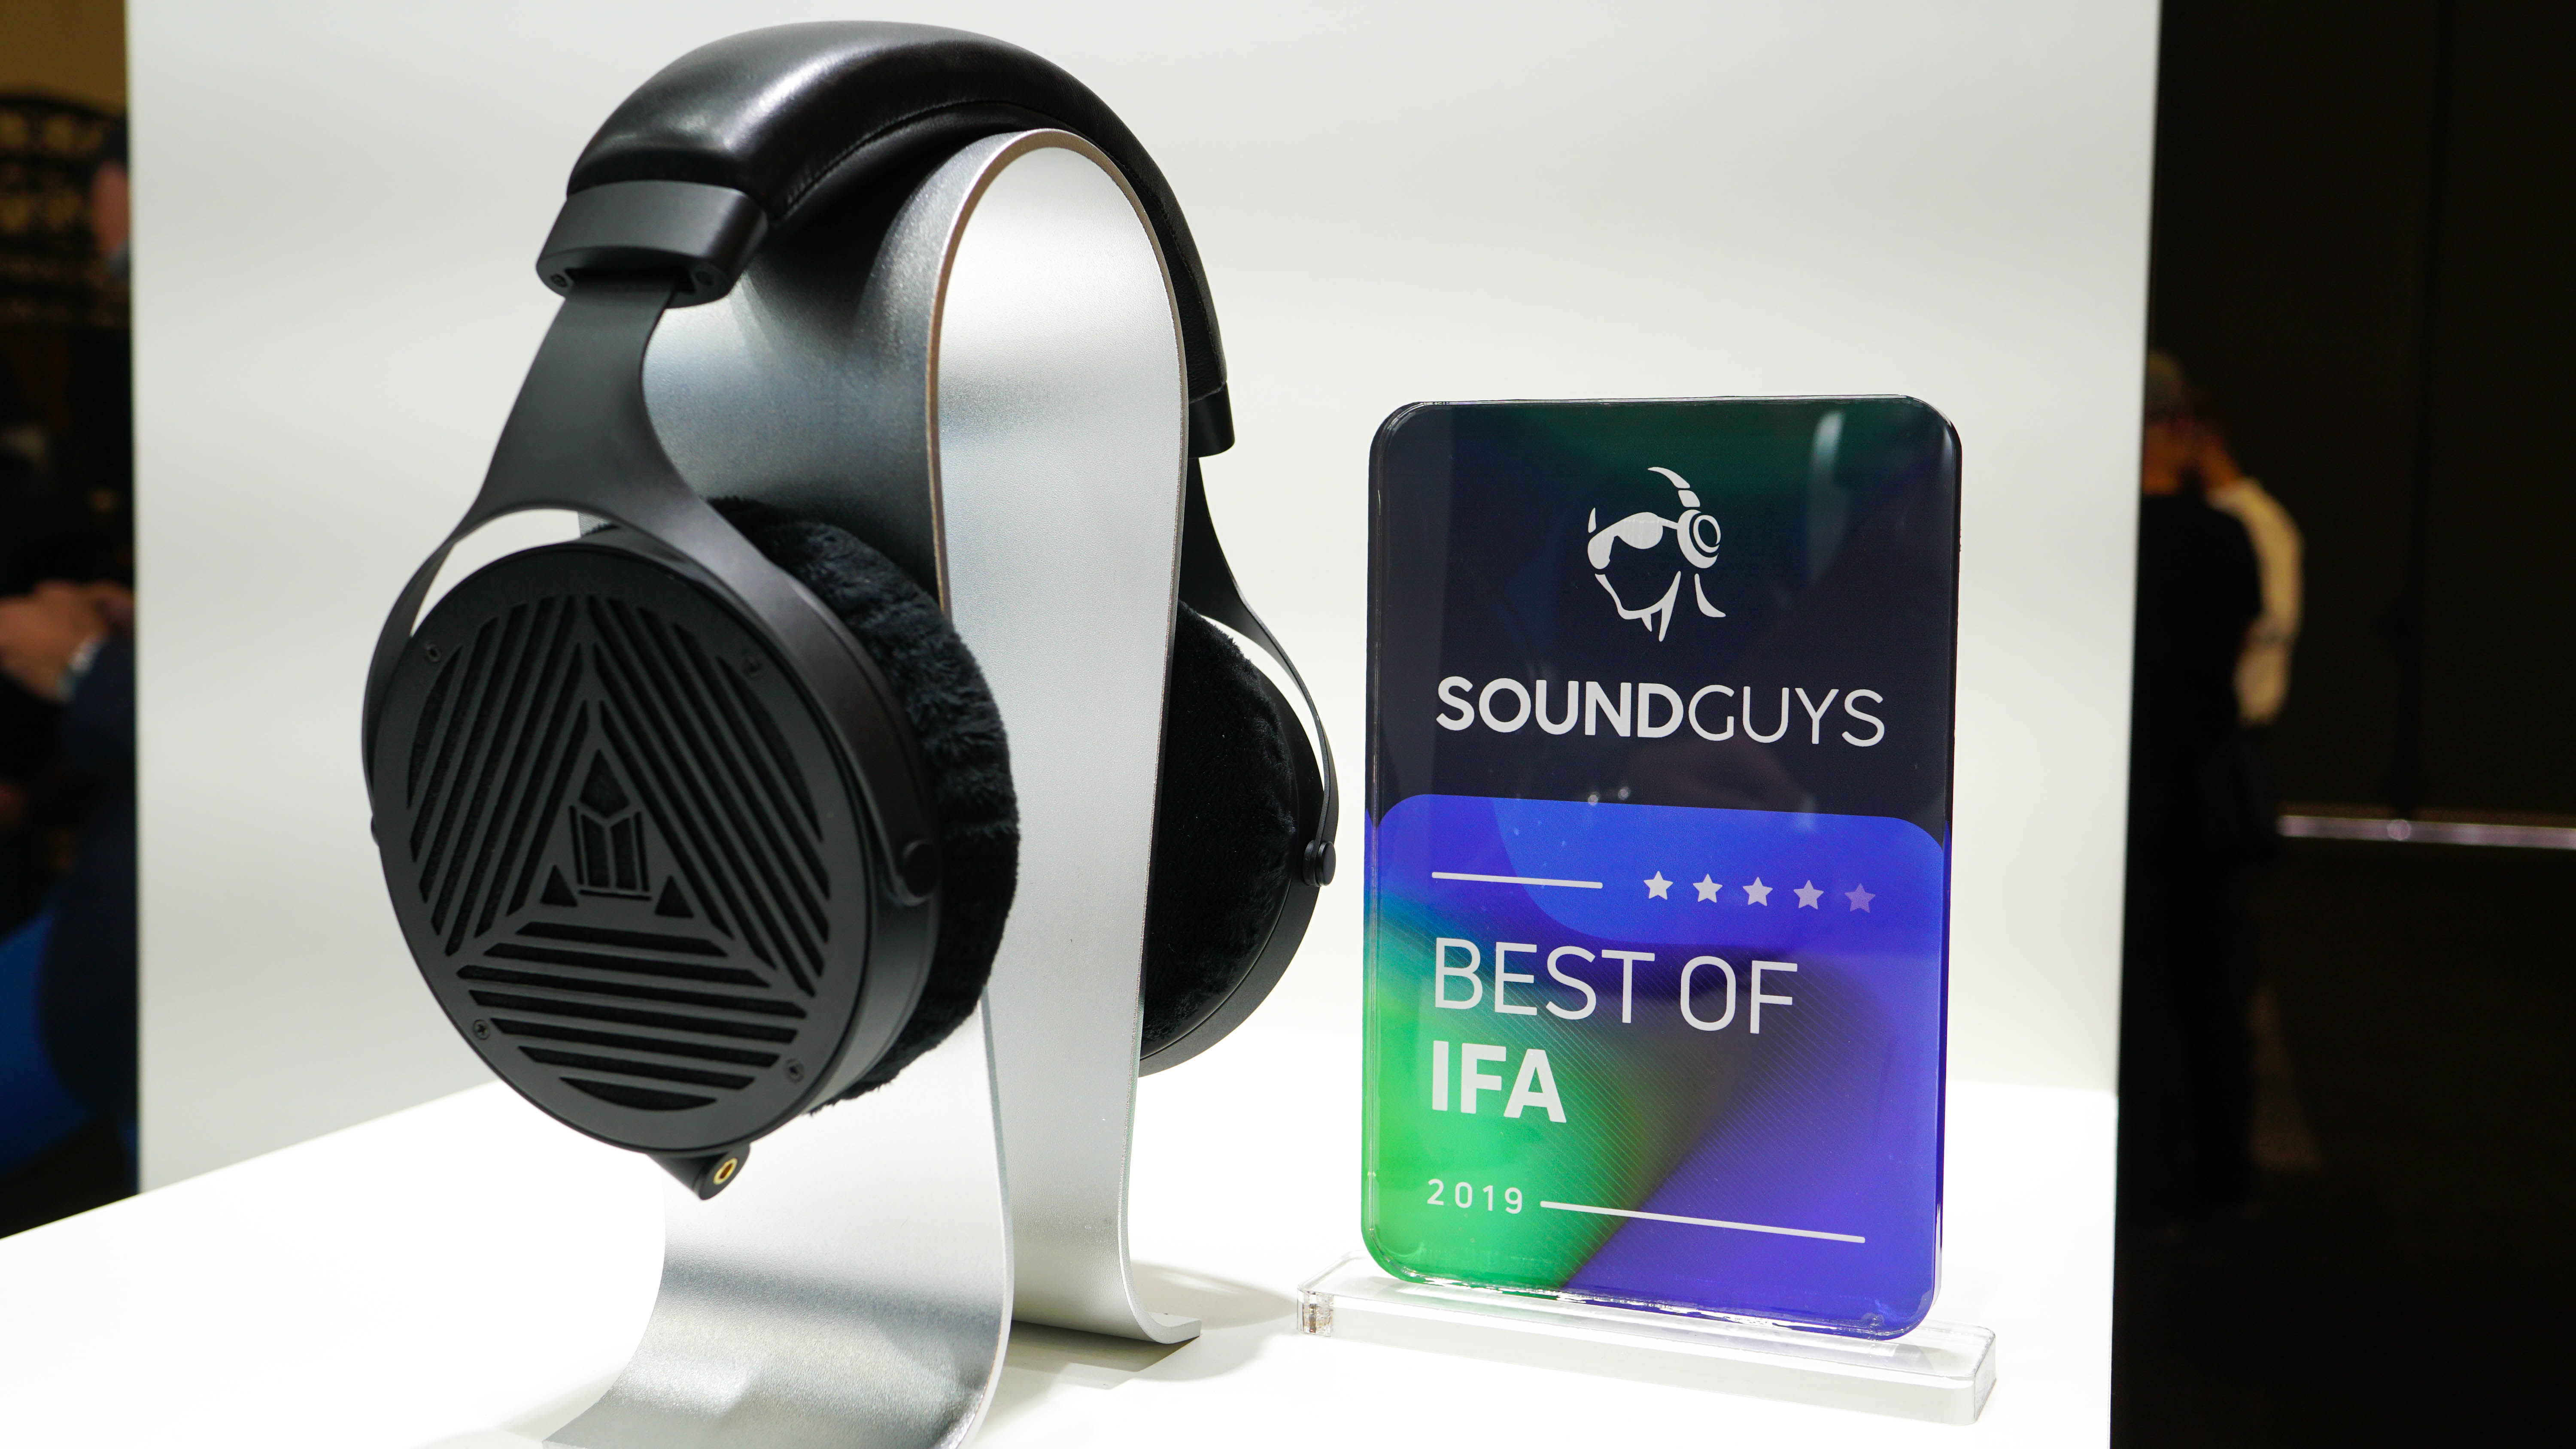 A photo of the Monoprice Monolith M1070 headphones on a stand next to the SoundGuys Best of IFA award.